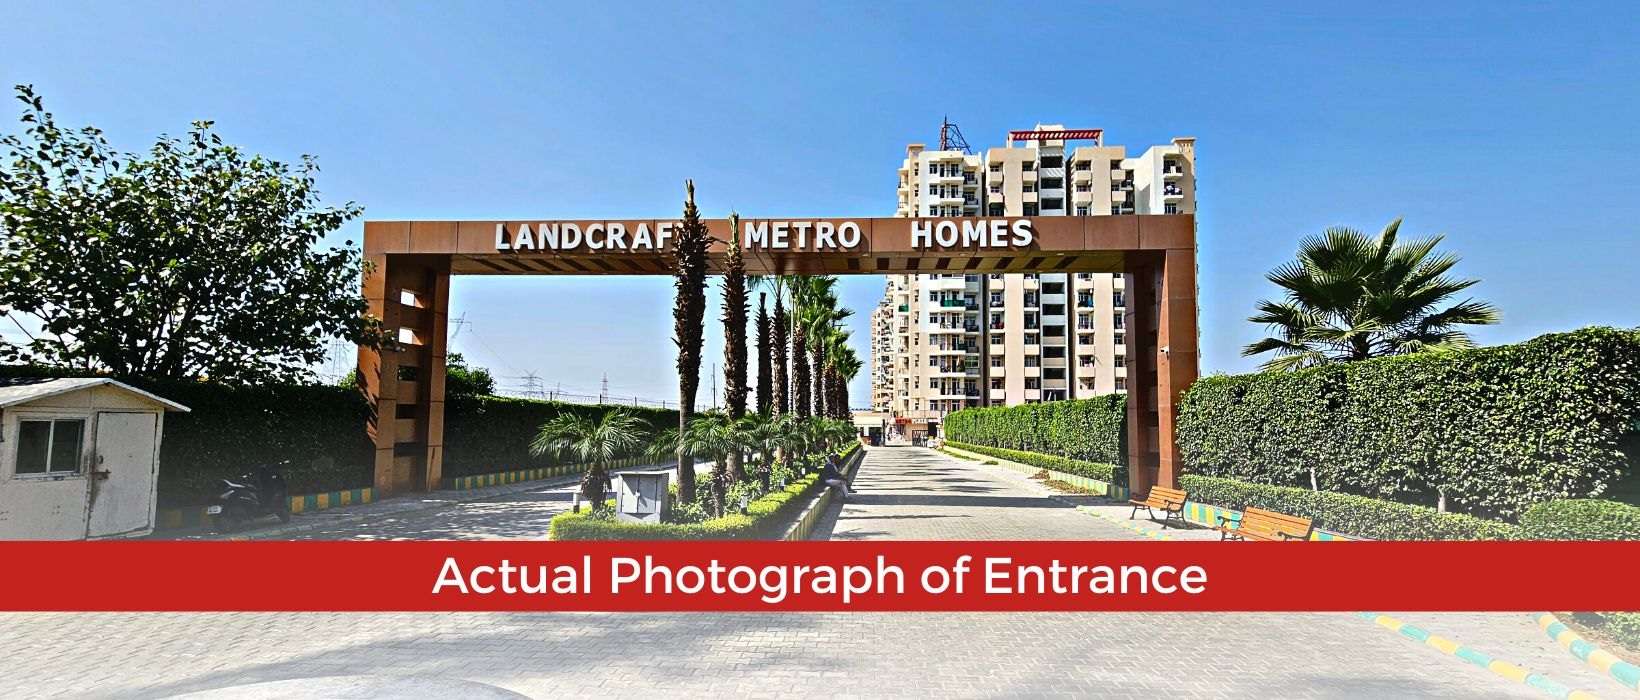 land craft metro homes phase 1 project entrance view1 5576